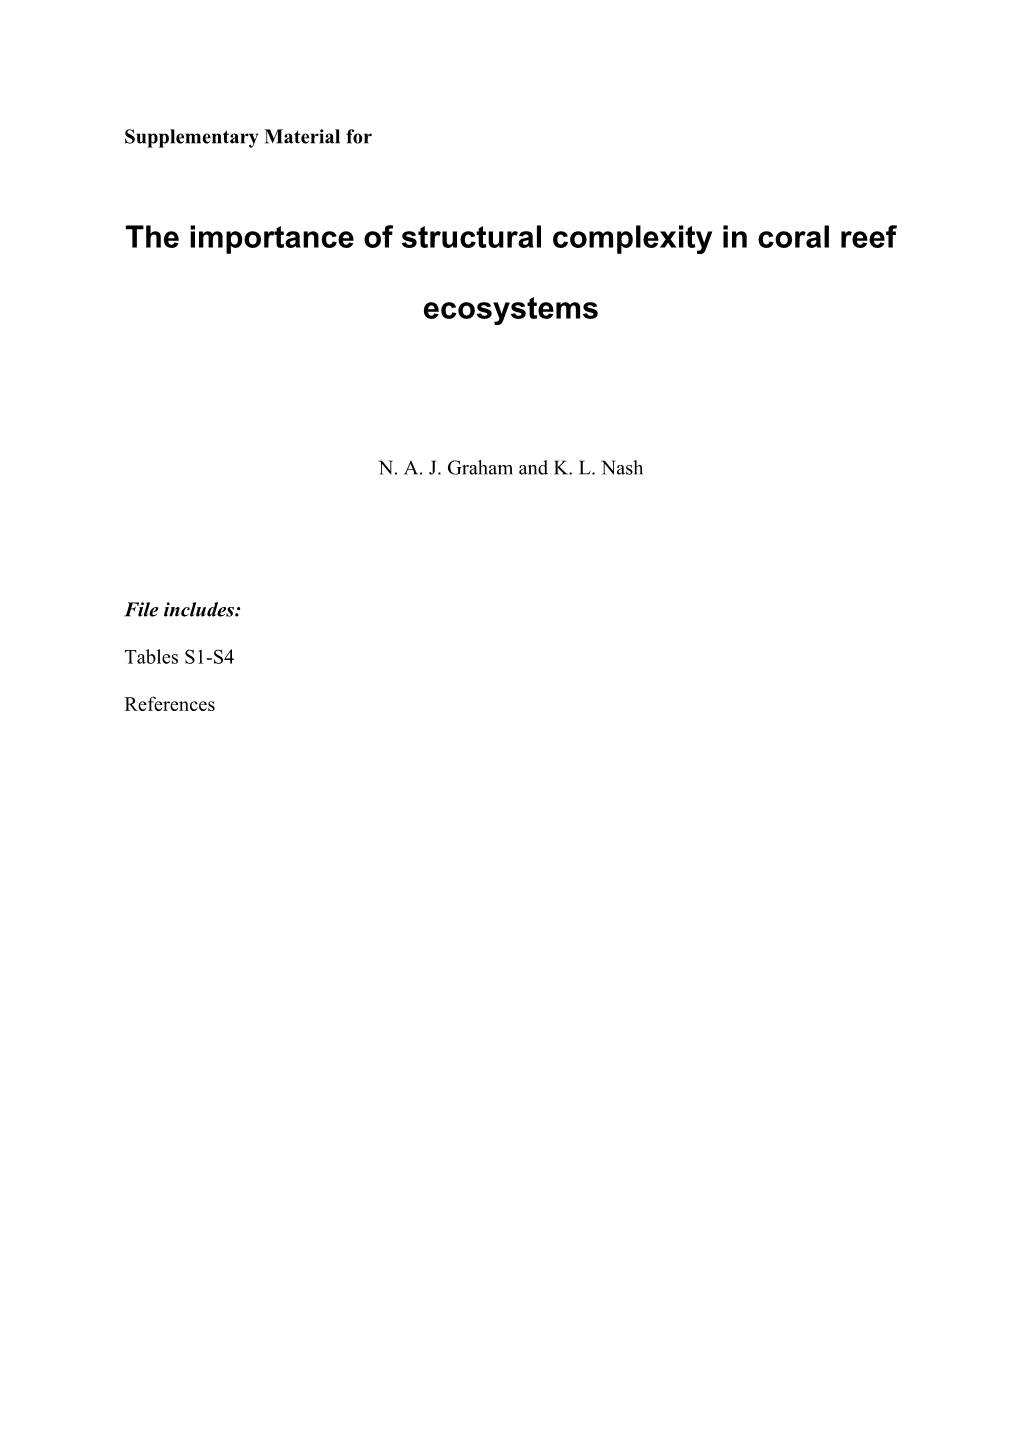 The Importance of Structural Complexity in Coral Reef Ecosystems